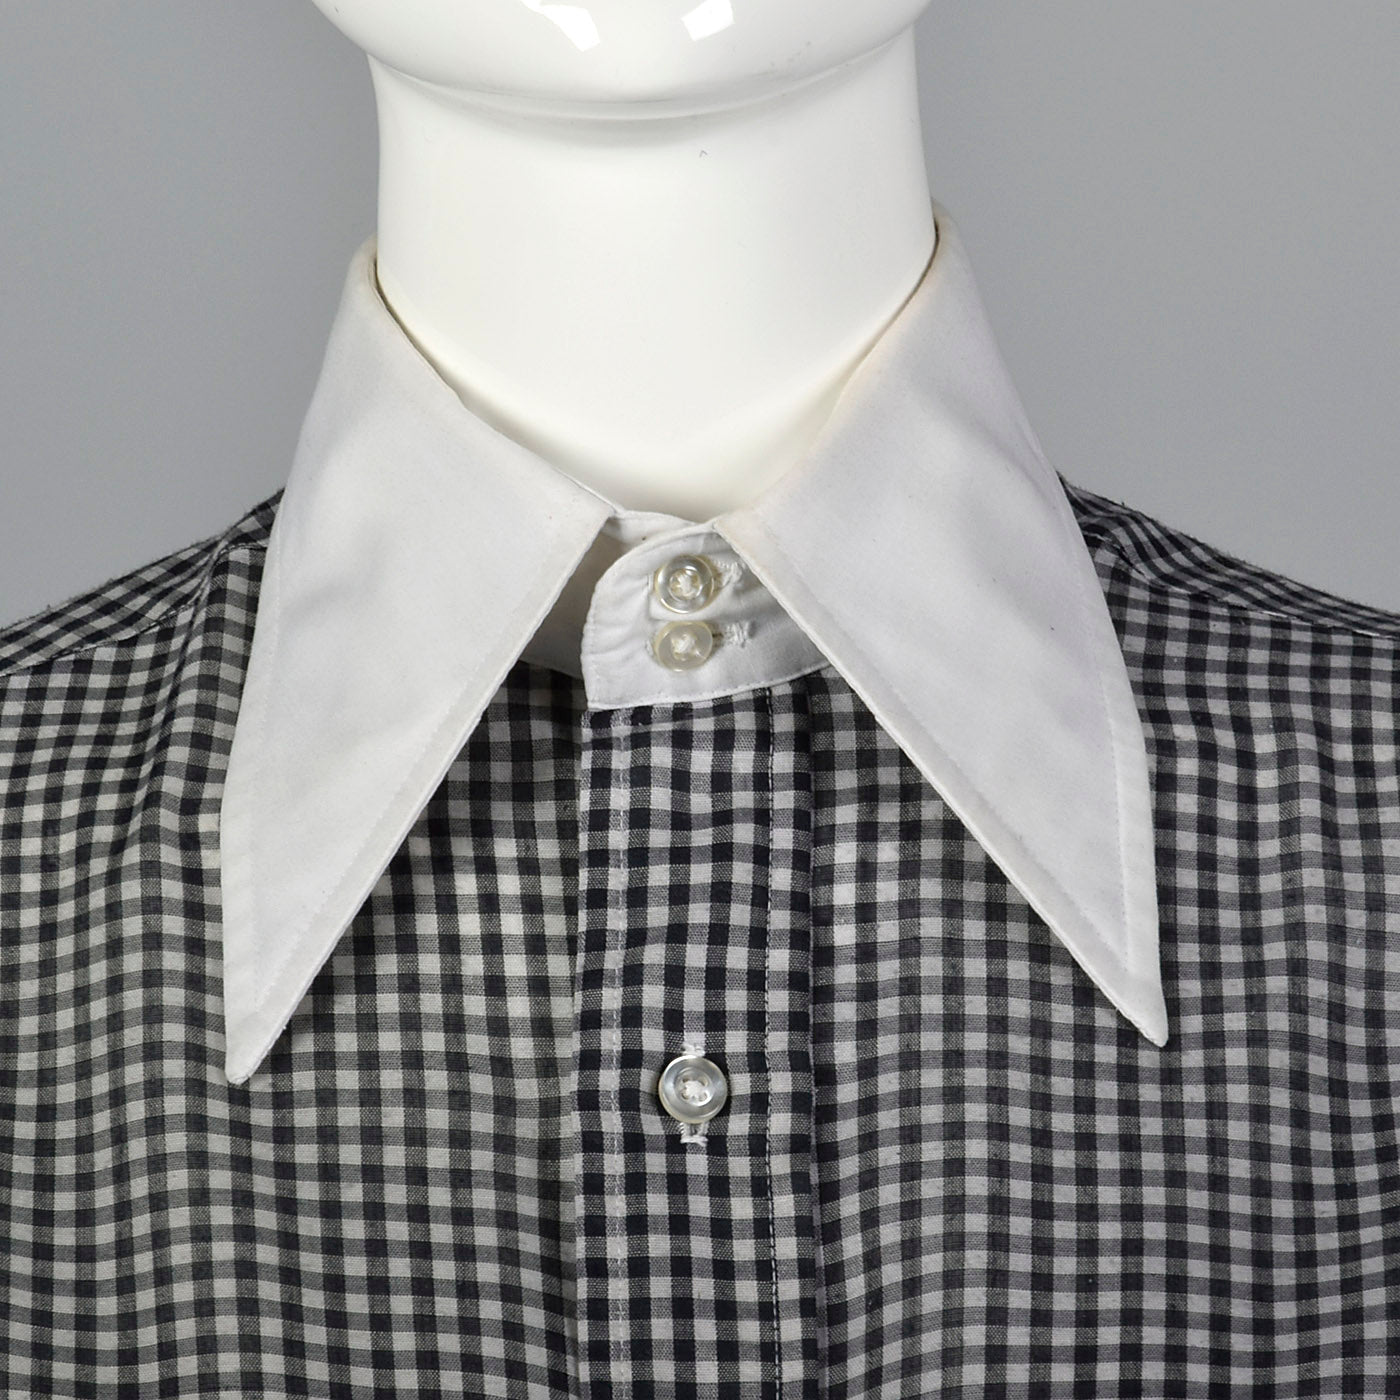 1970s Black and White Gingham Blouse